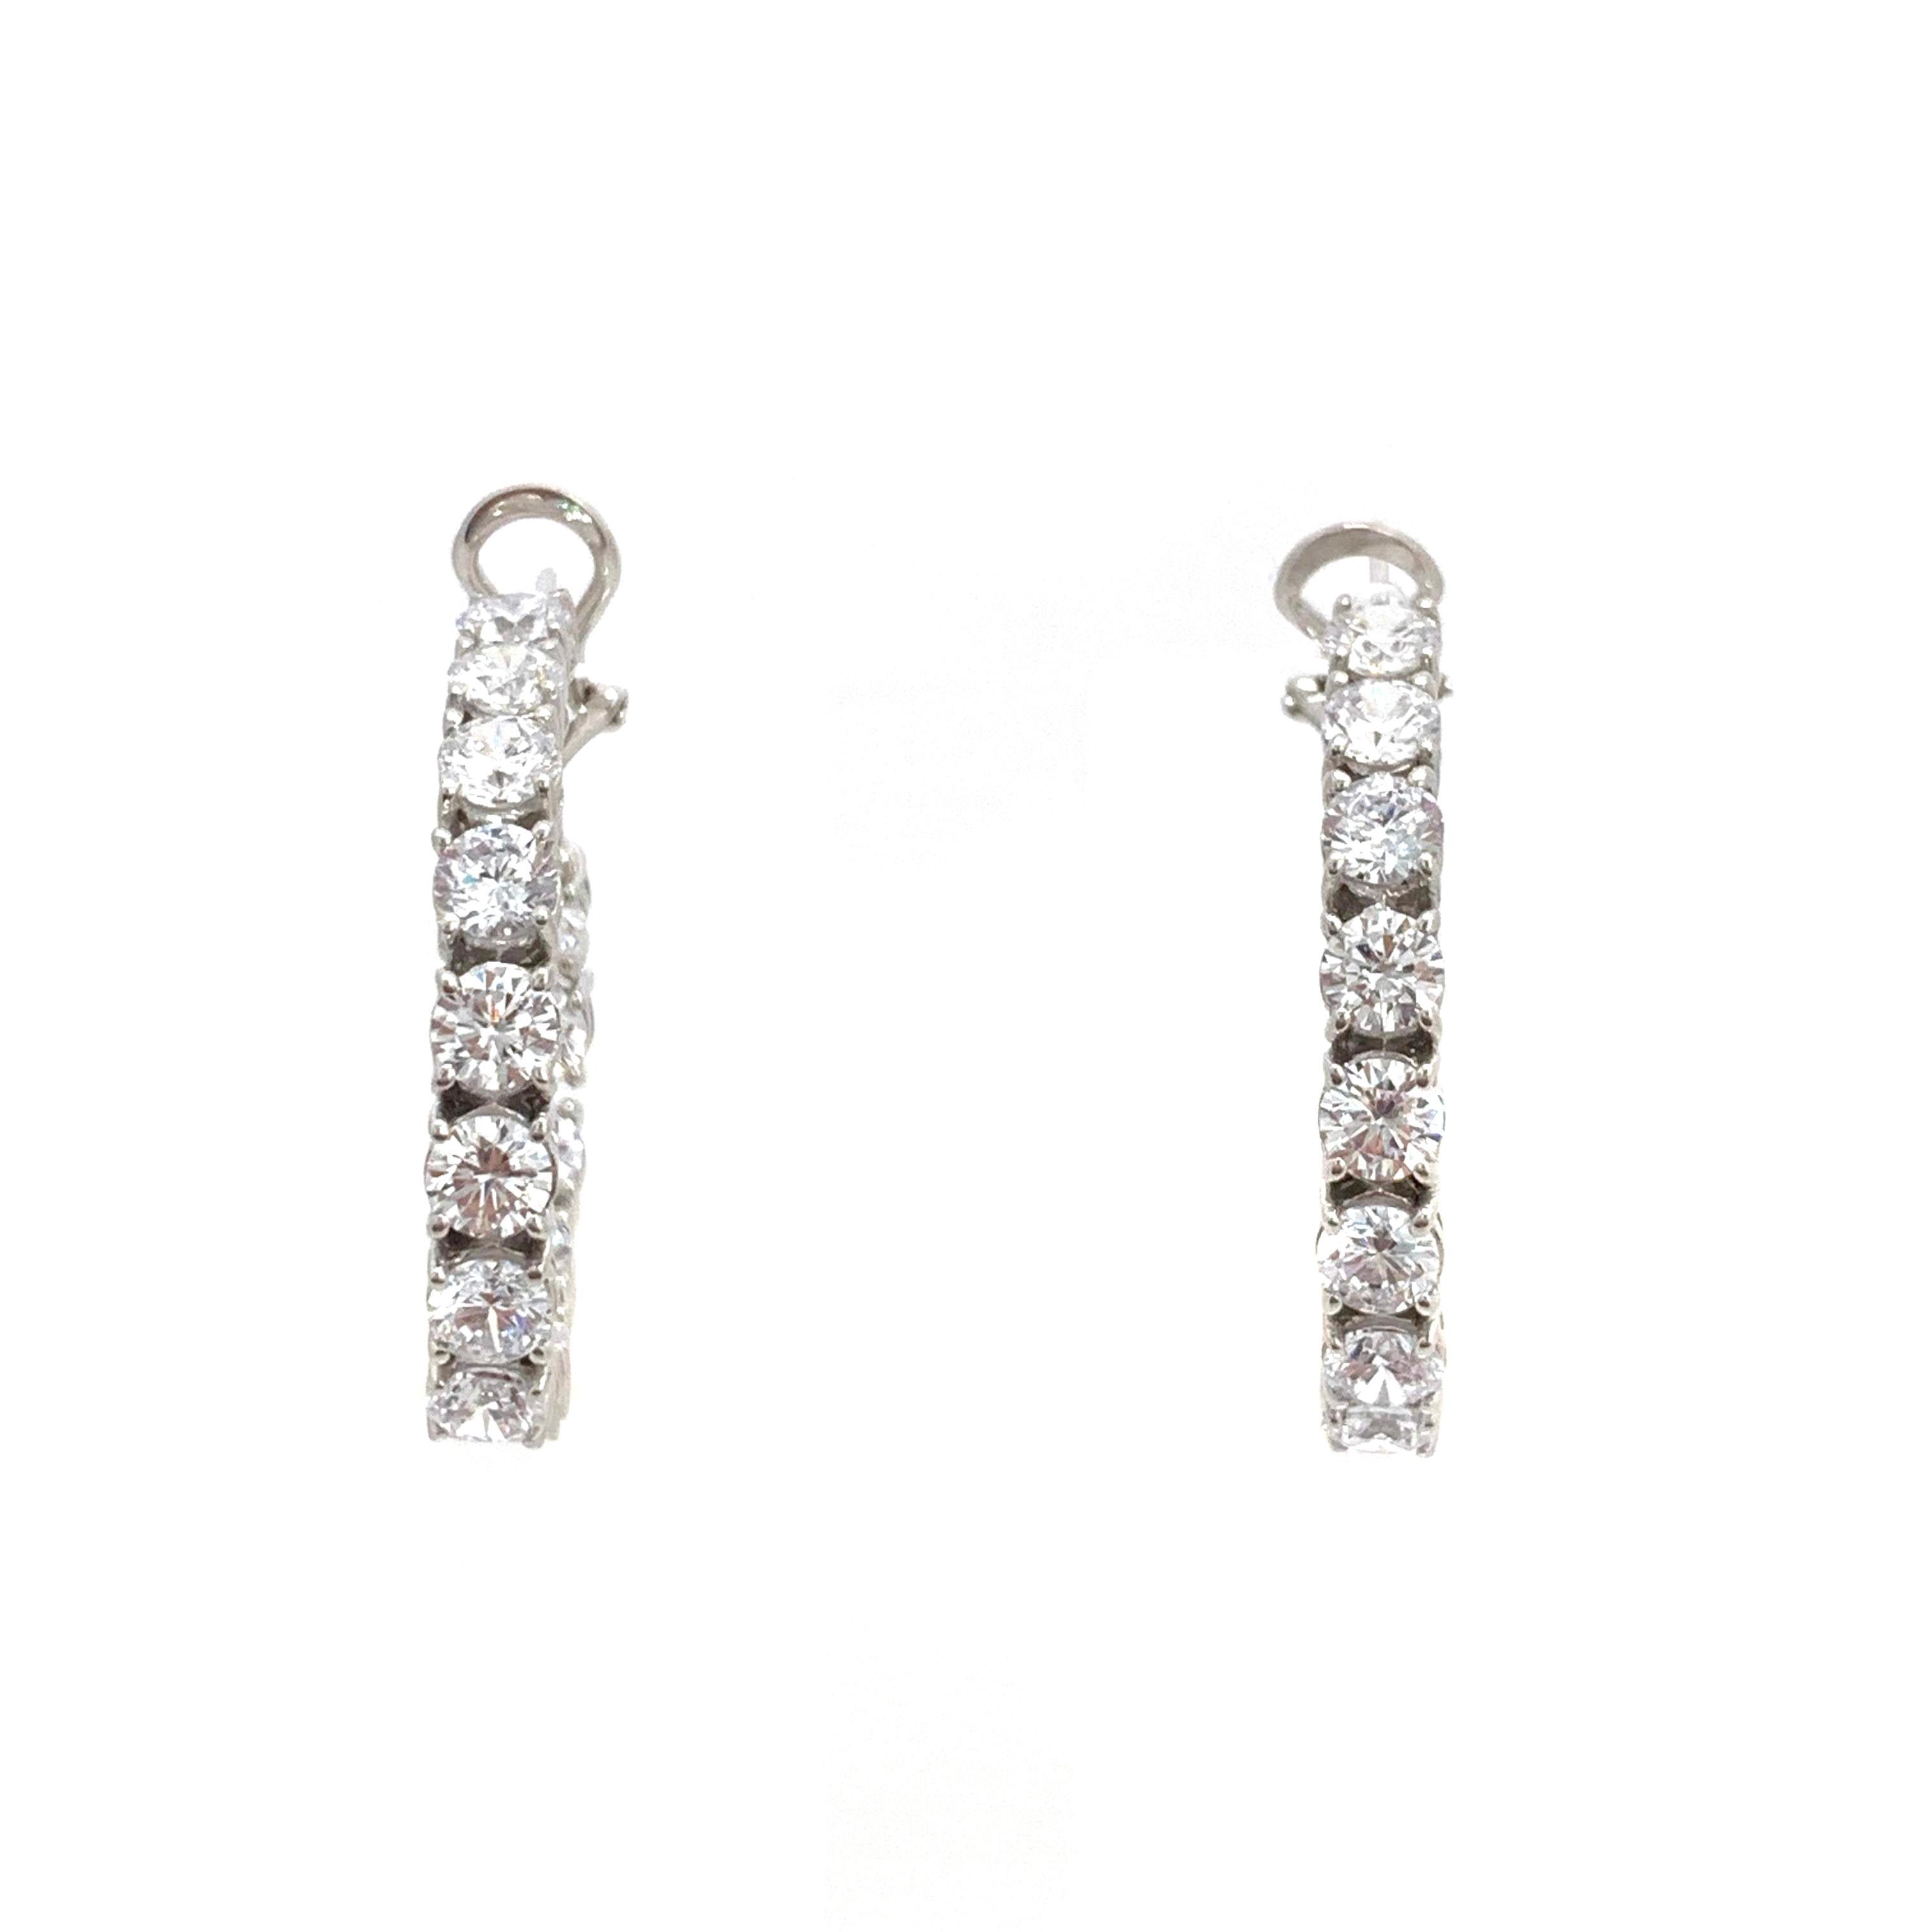 Contemporary Stunning Simulated Diamond Sterling Silver Hoop Earrings